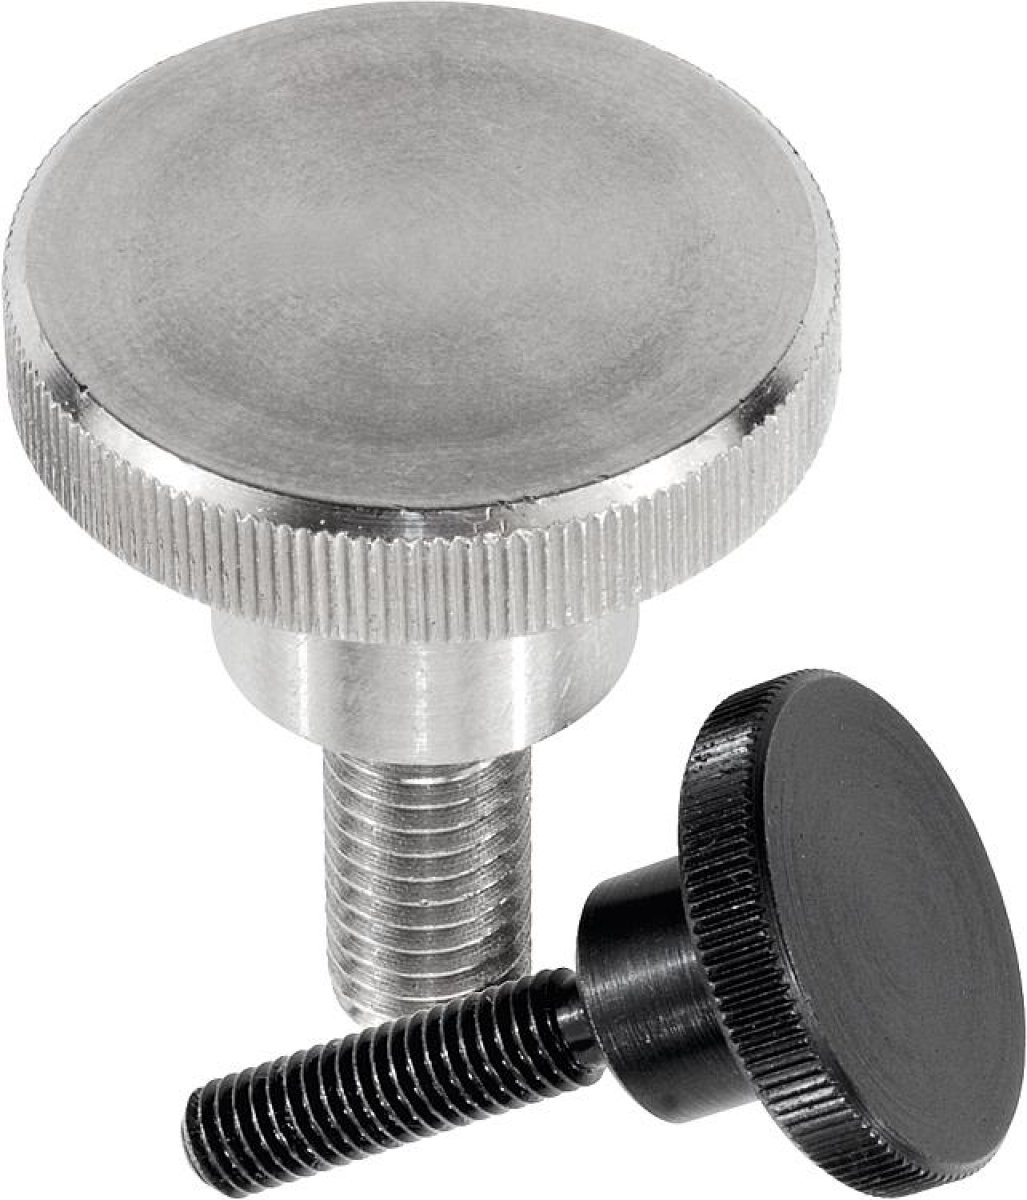 Knurled screws high form steel and stainless steel, DIN 464